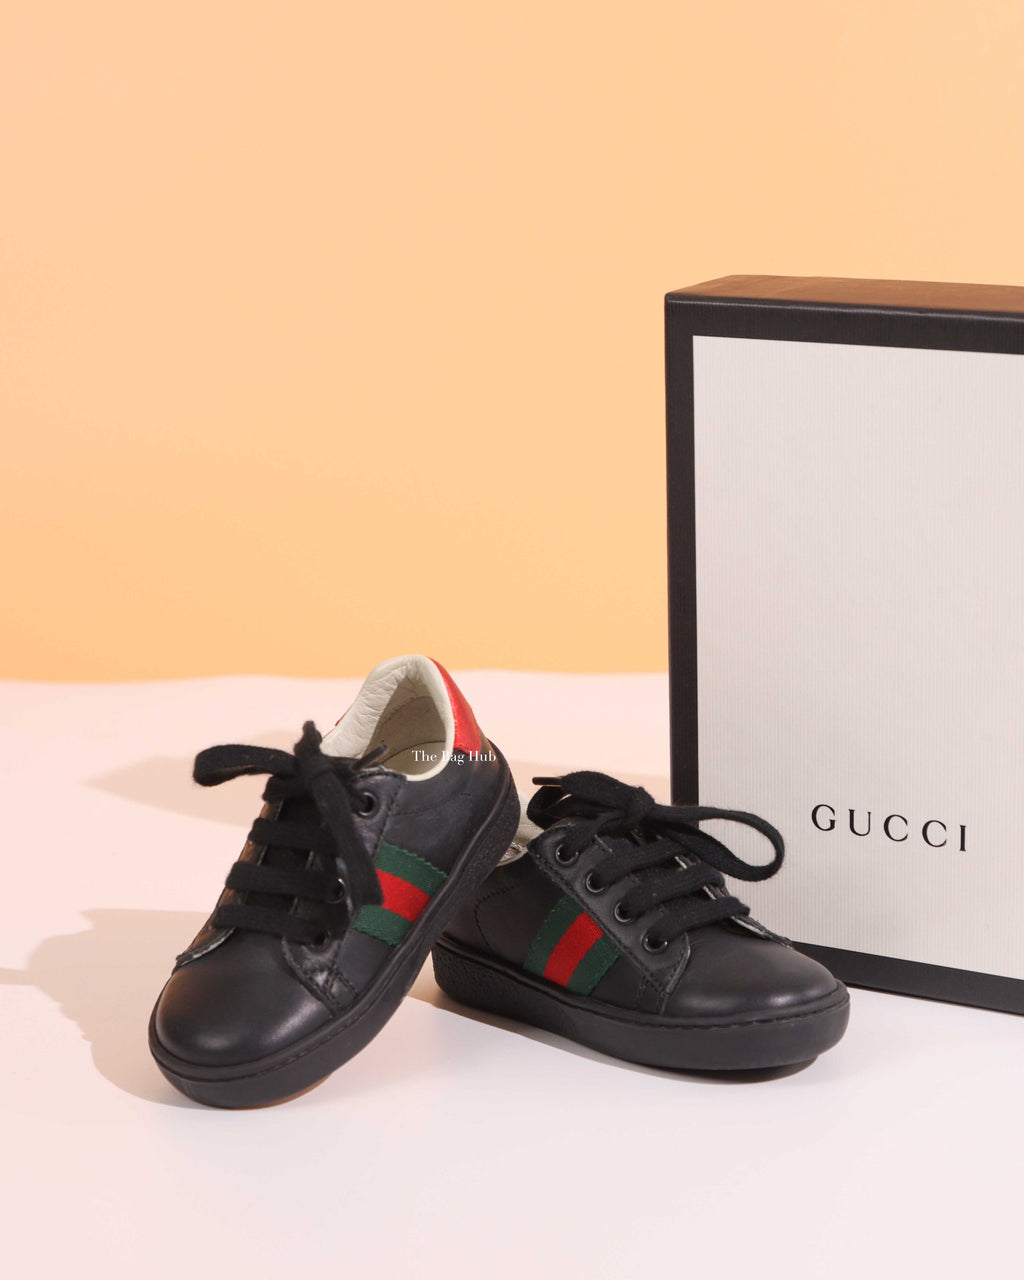 Gucci Black/Red/Green Web Toddler Low Top Sneakers Size 21